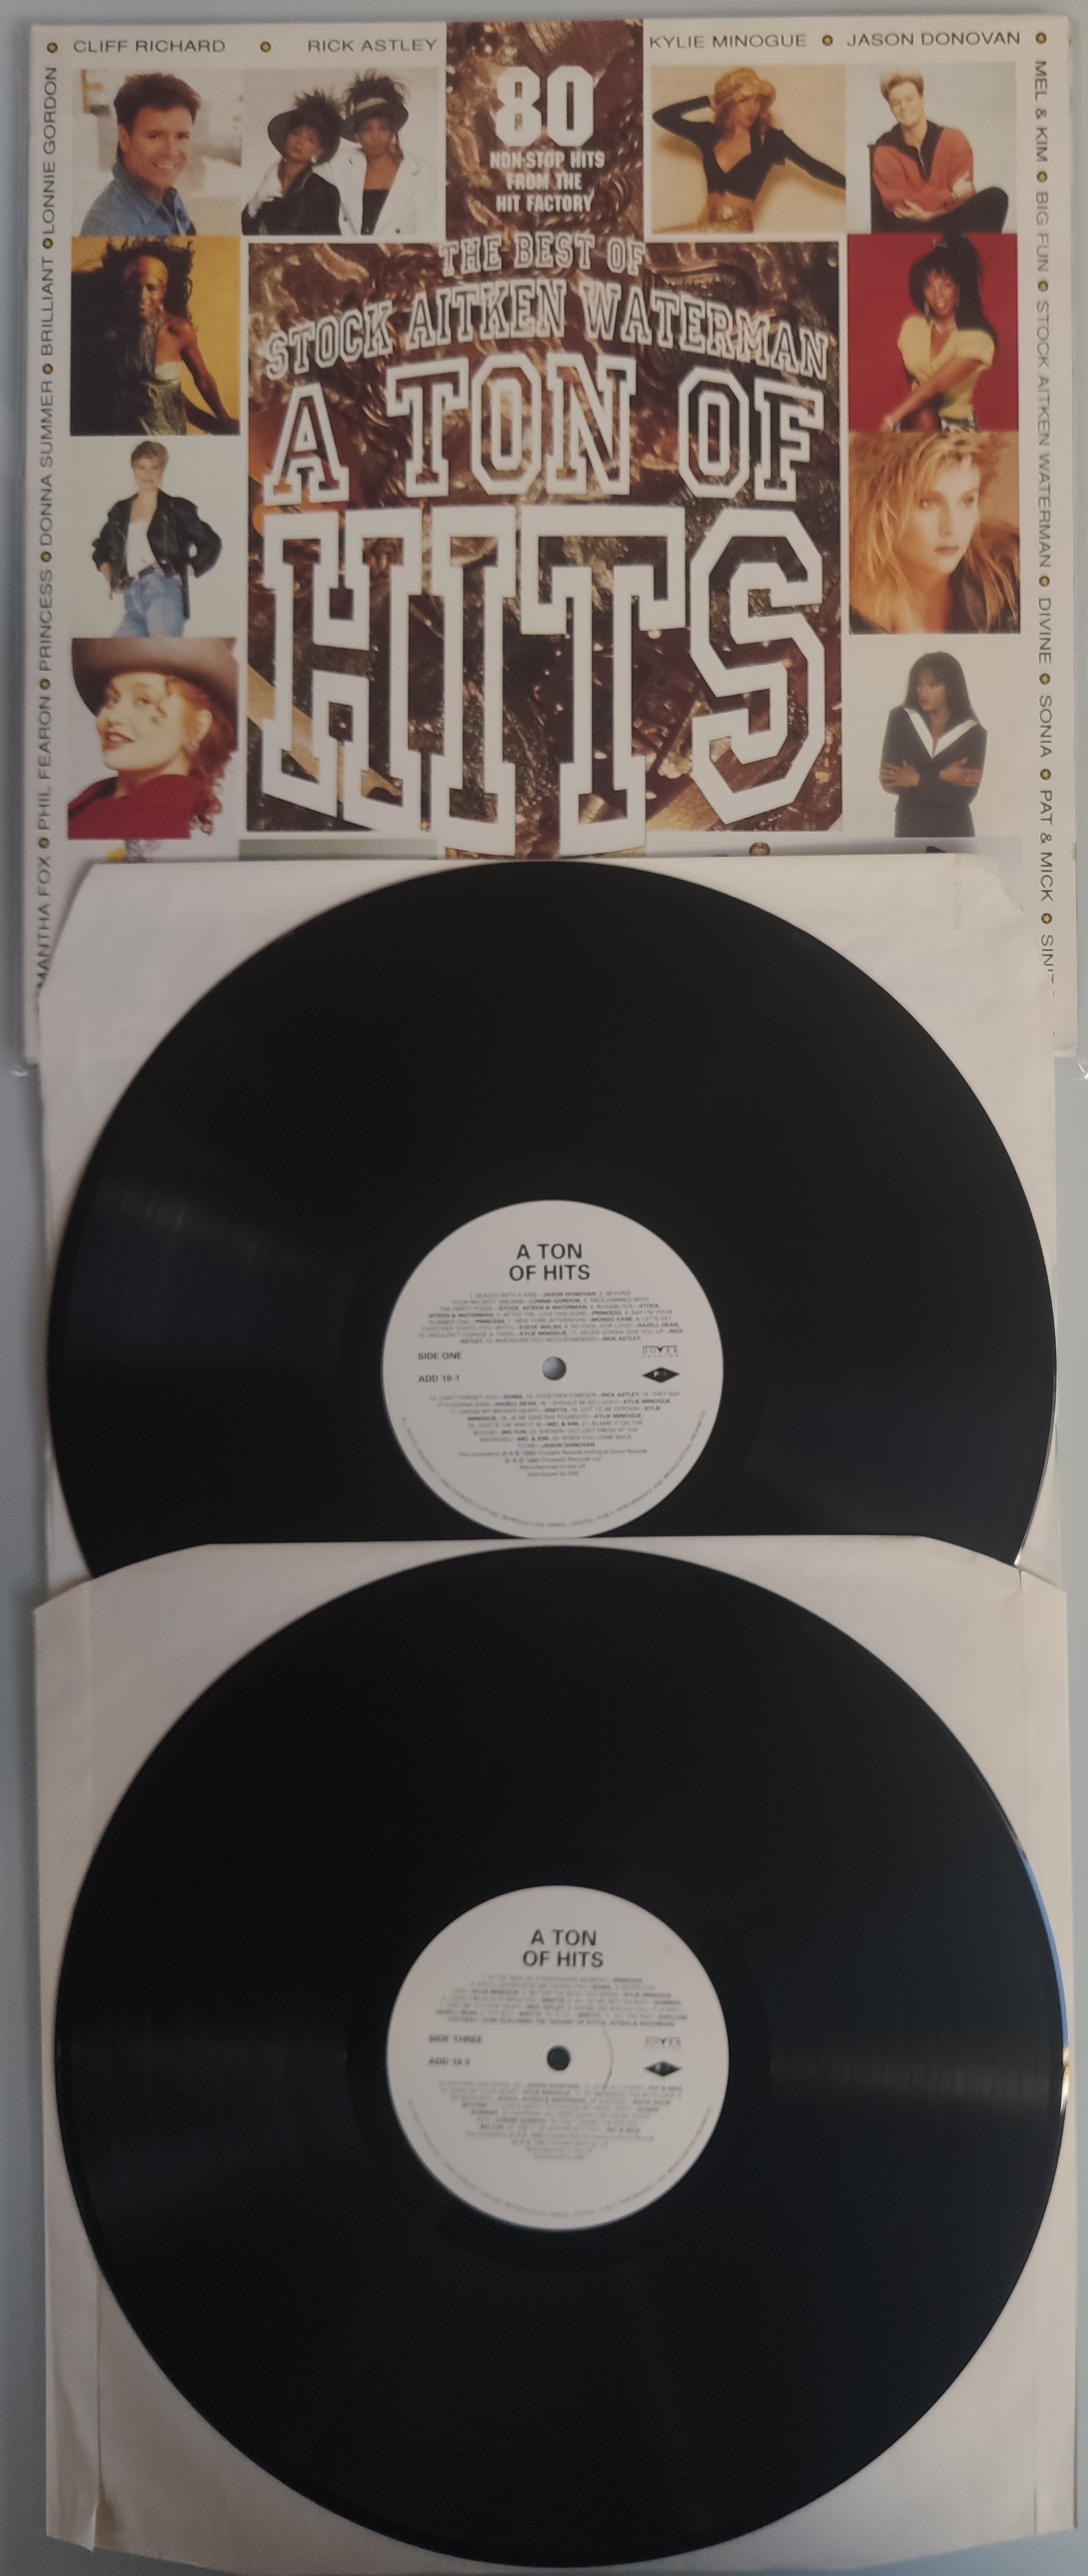 3 x The Hits Double LPs and Box Set – All UK First Pressings. VG+ To EX Condition. - Image 4 of 4